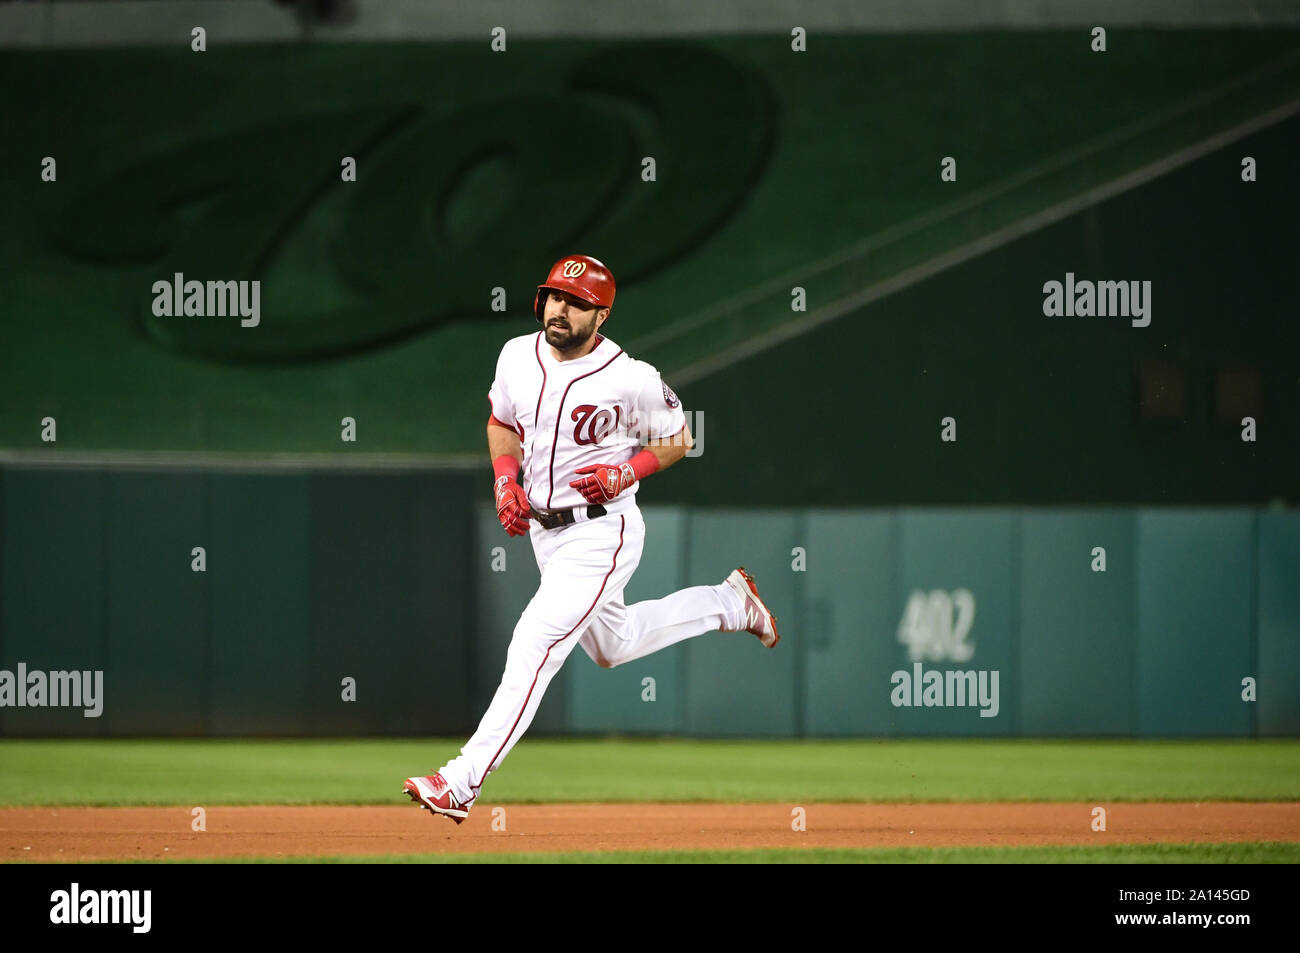 Washington, United States. 23rd Sep, 2019. Washington Nationals Adam Eaton runs the baes after hitting a solo home run against the Philadelphia Phillies in the first inning at Nationals Park in Washington, DC on September 23, 2019. Photo by Kevin Dietsh/UPI Credit: UPI/Alamy Live News Stock Photo